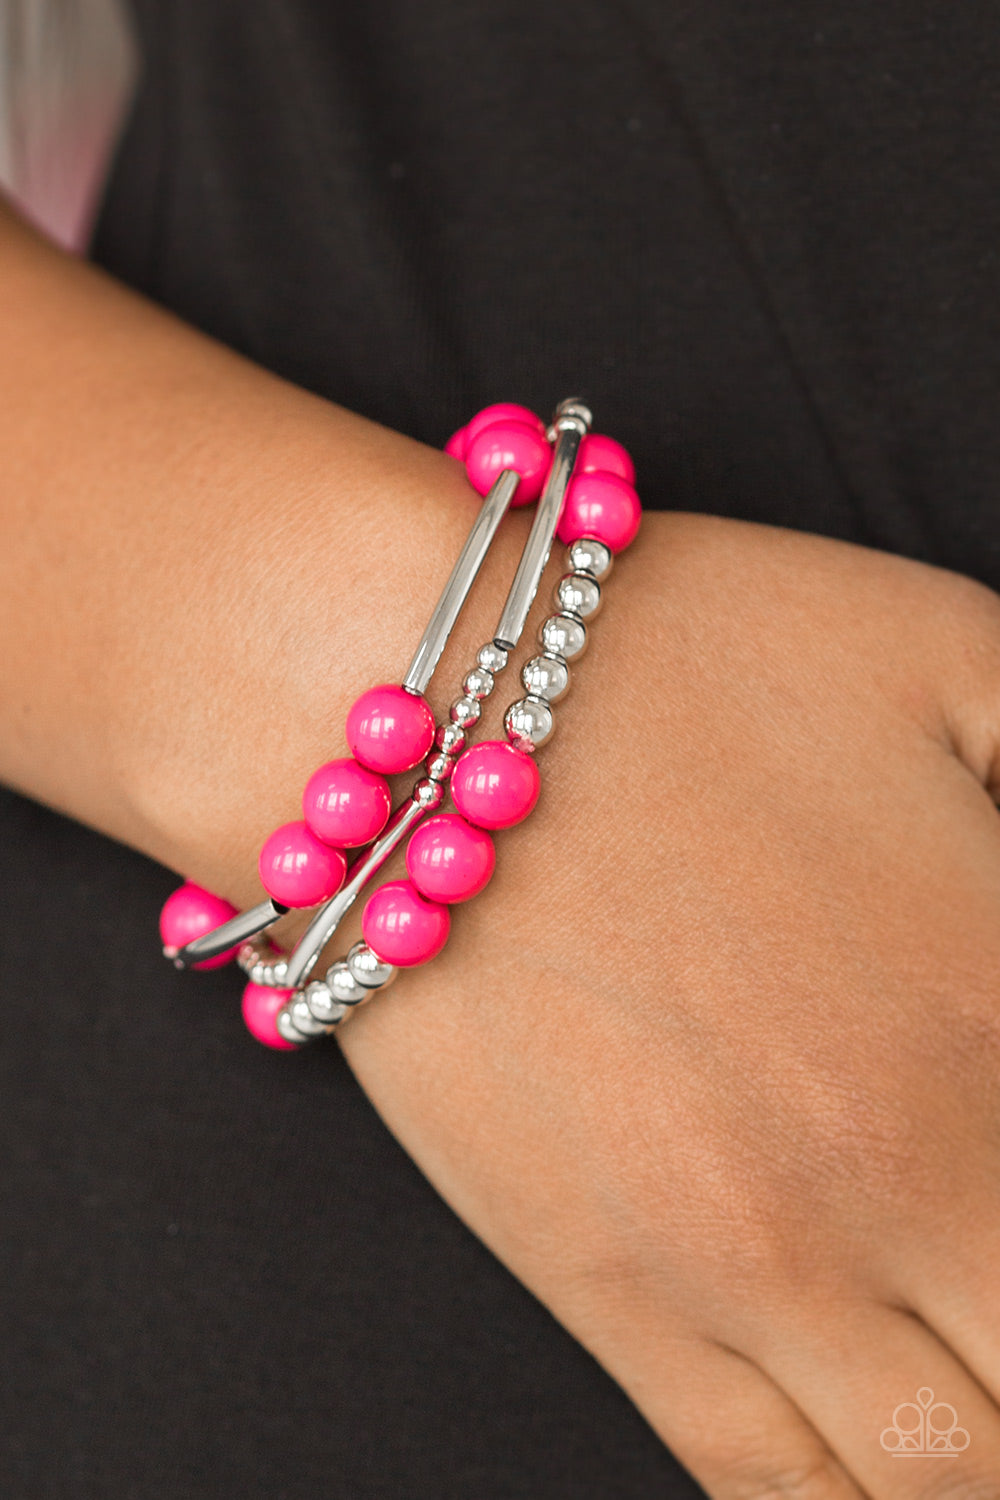 New Adventures - Pink & Silver Bracelet - Chic Jewelry Boutique